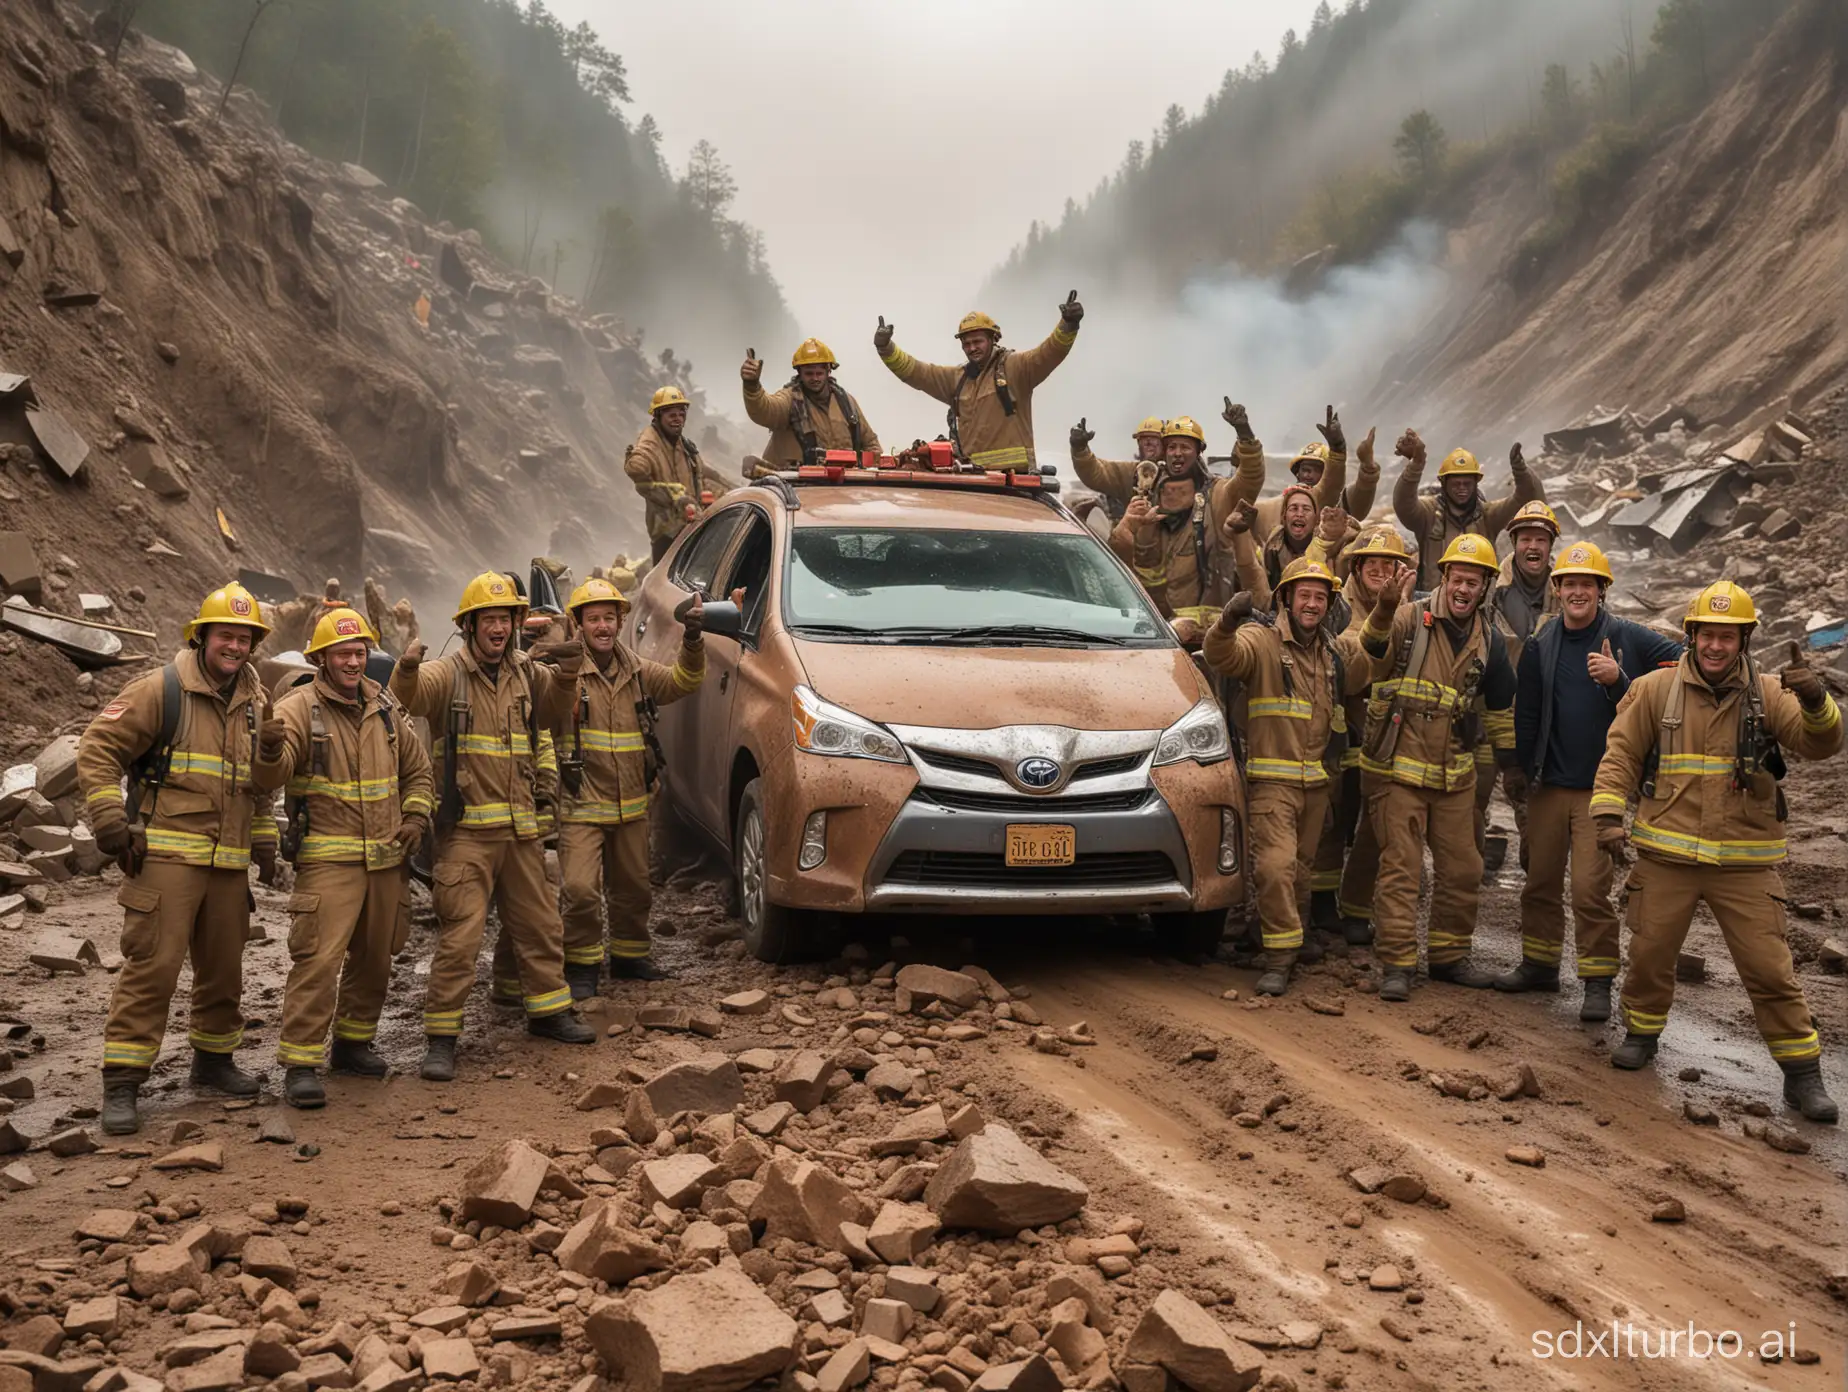 A group of firefighters celebrates at the site of a landslide covers an entire road at Big Surr. The front half of a brown prius sticks out of the rubble. The driver reaches out with a big "thumbs up". In the style of a Marvel movie.